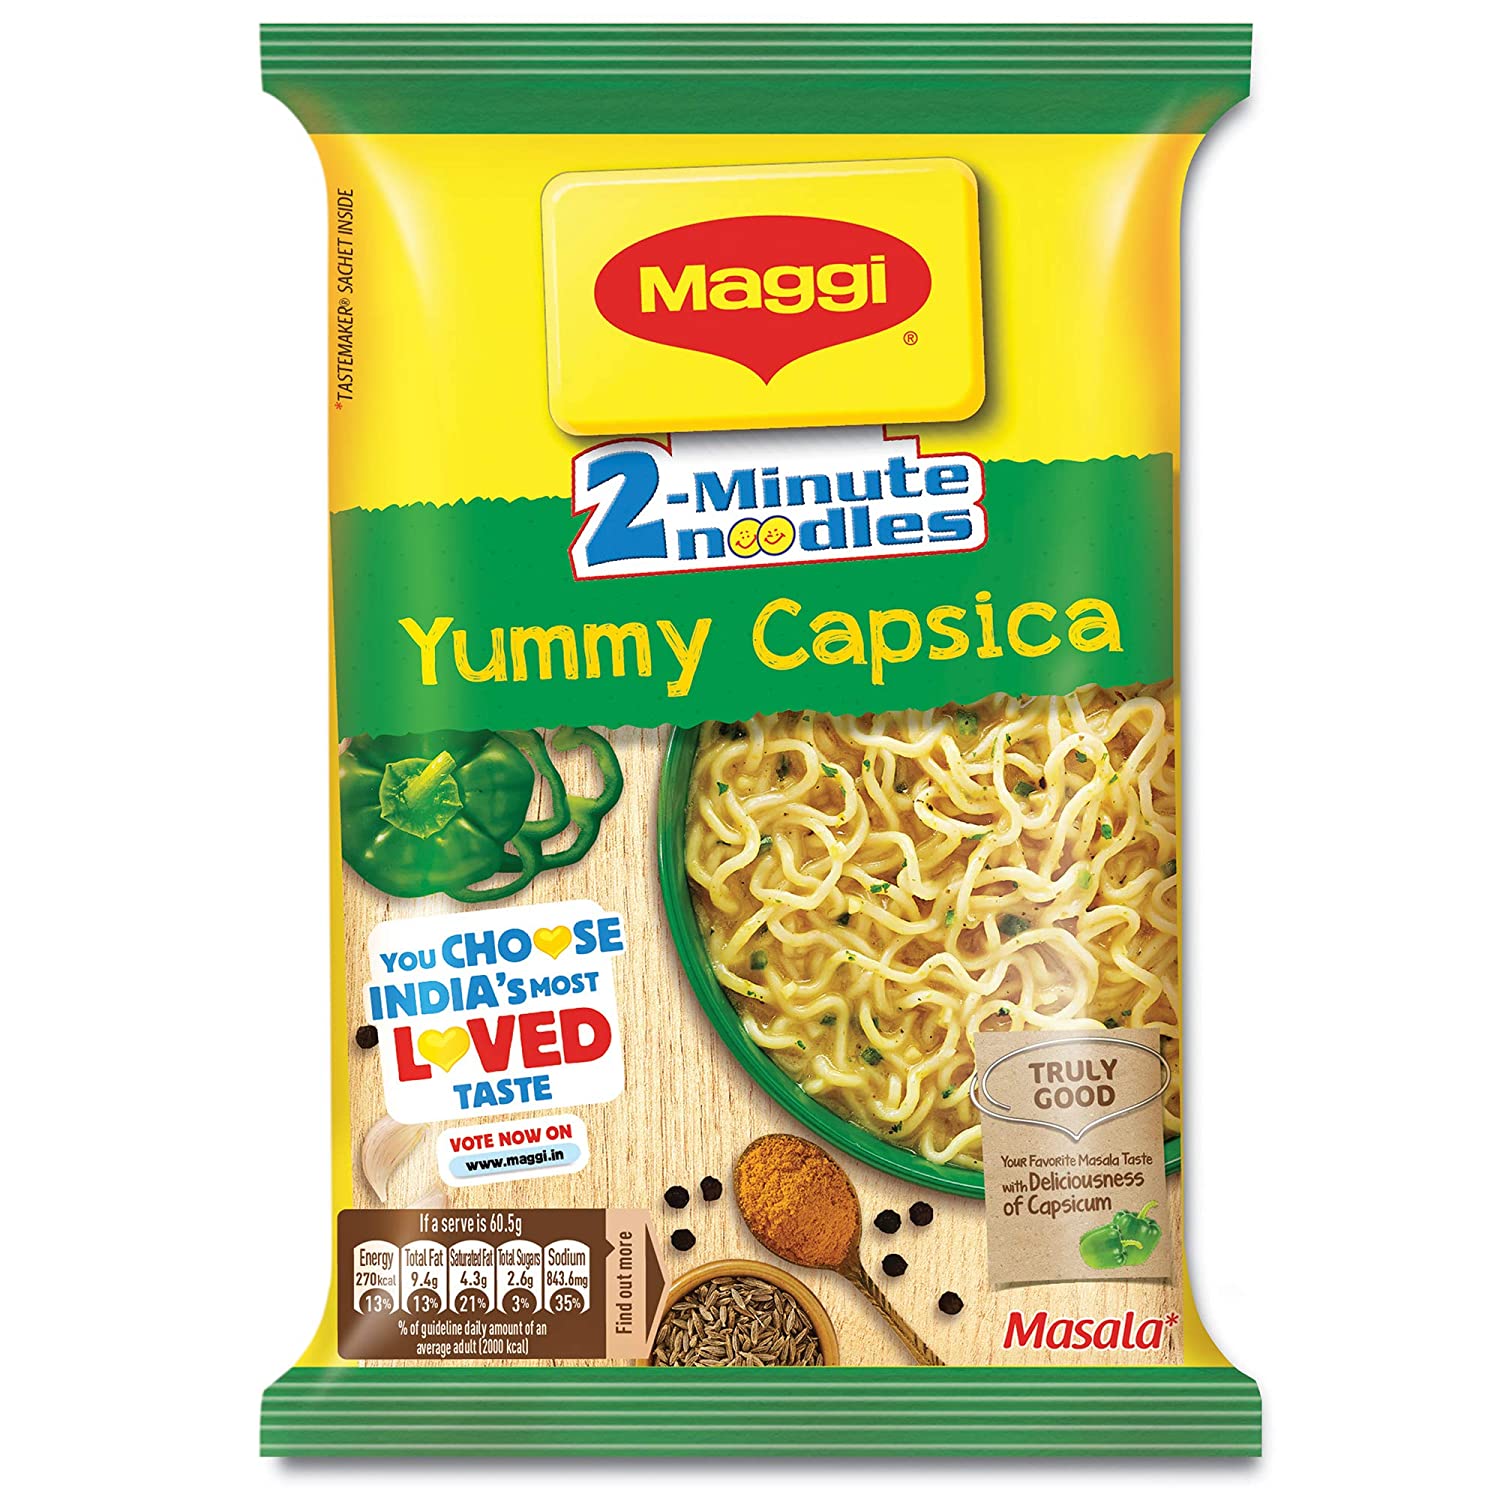 Maggi Yummy Capsica Instant Noodles